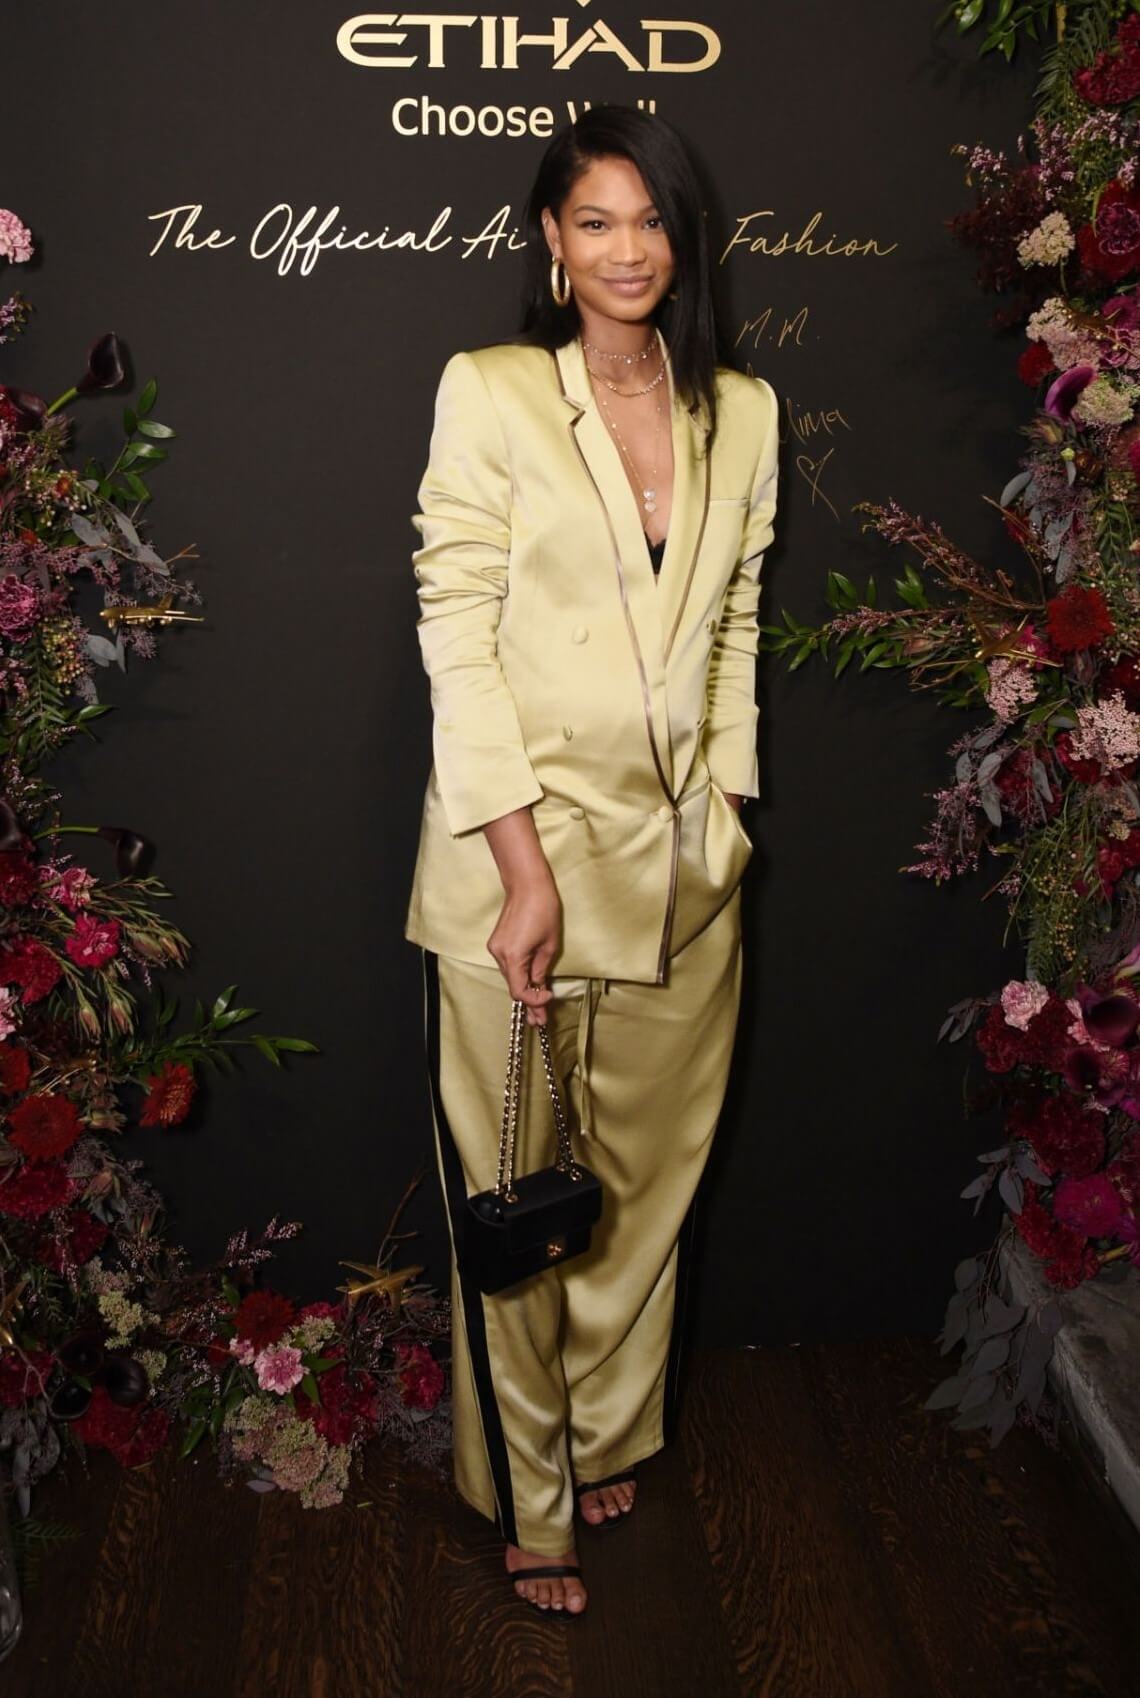 Chanel Iman  In Light Golden Blazer With Pants Outfits At Etihad Airways Cocktail Party in NYC